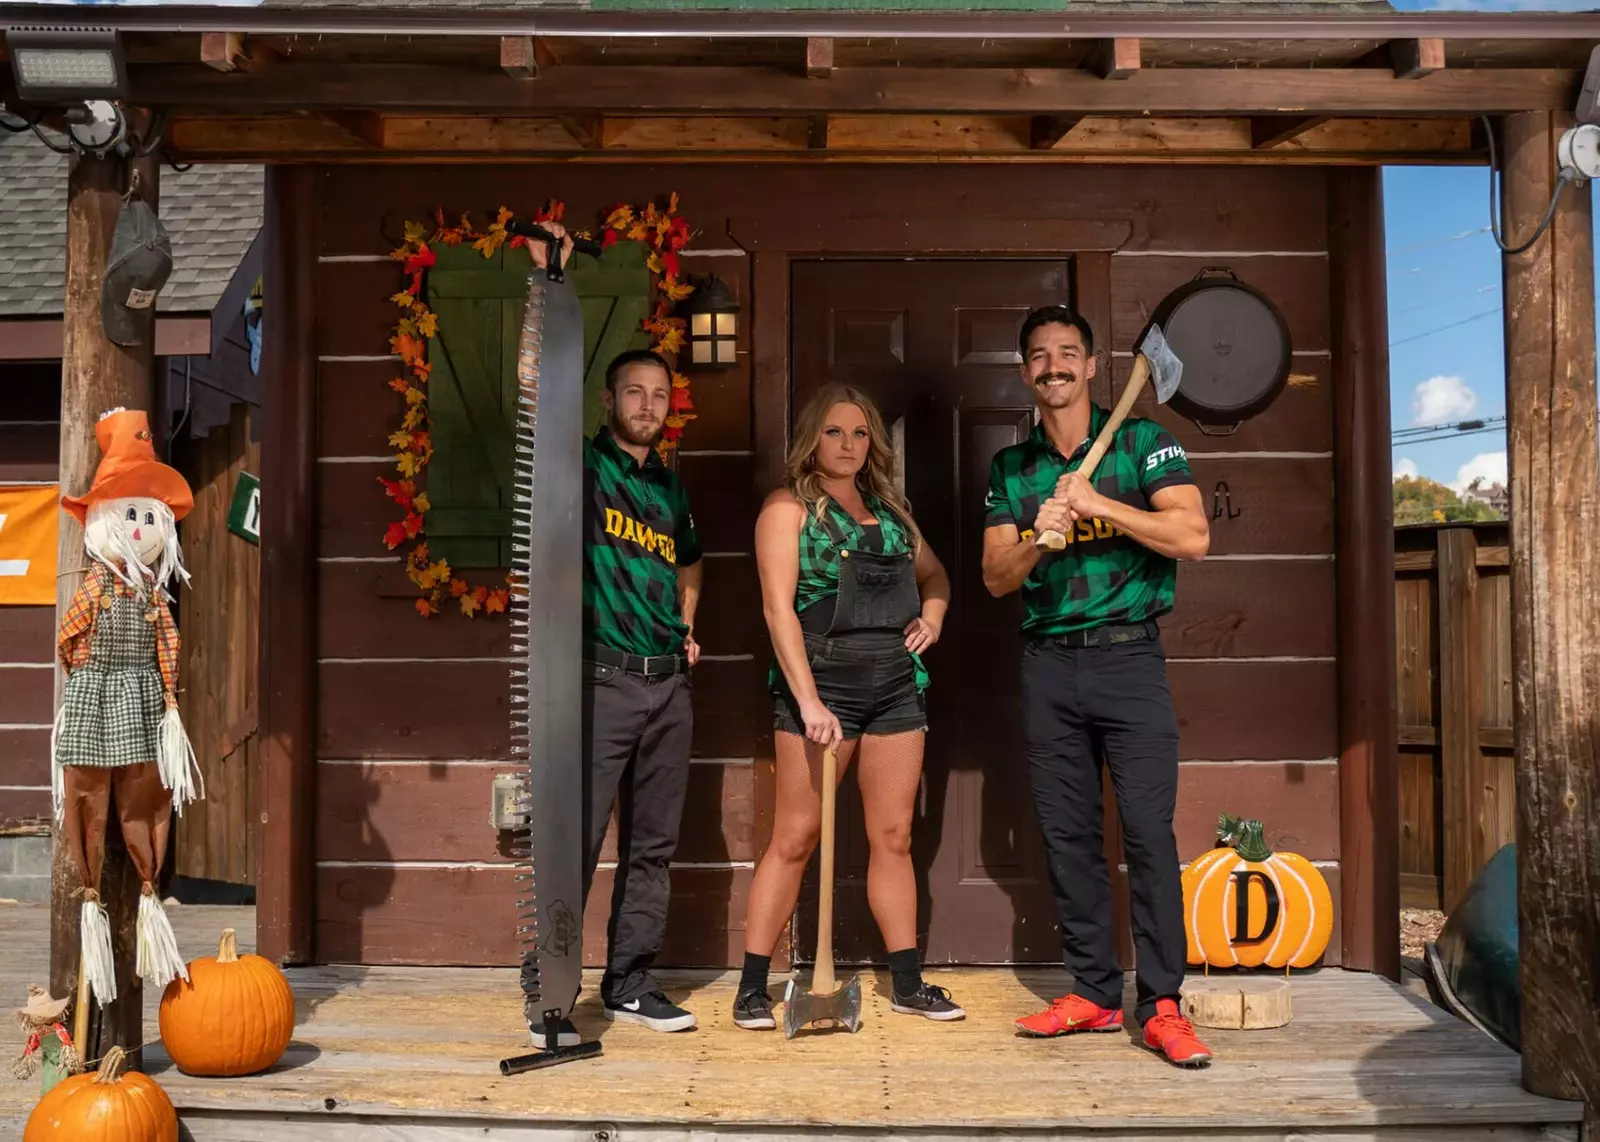 Dawson family ready to compete in Lumberjack show